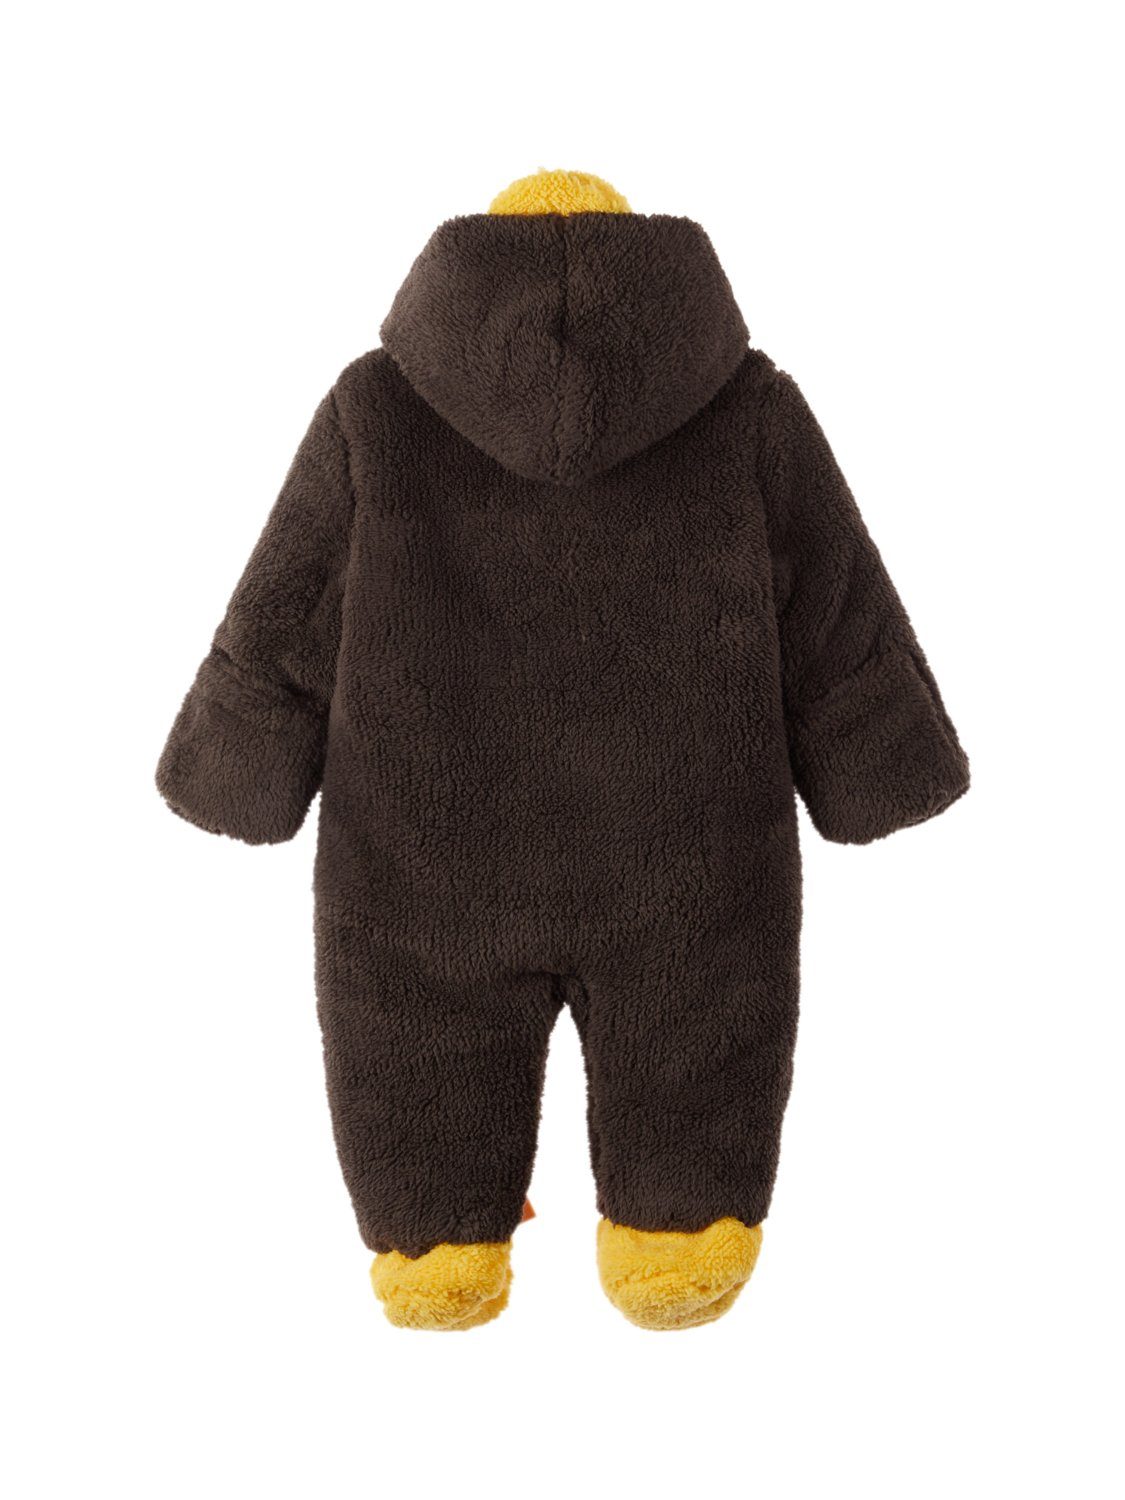 Schneeoverall It "Pinguin" It Name Baby Name Teddy-Schneeanzug Unisex